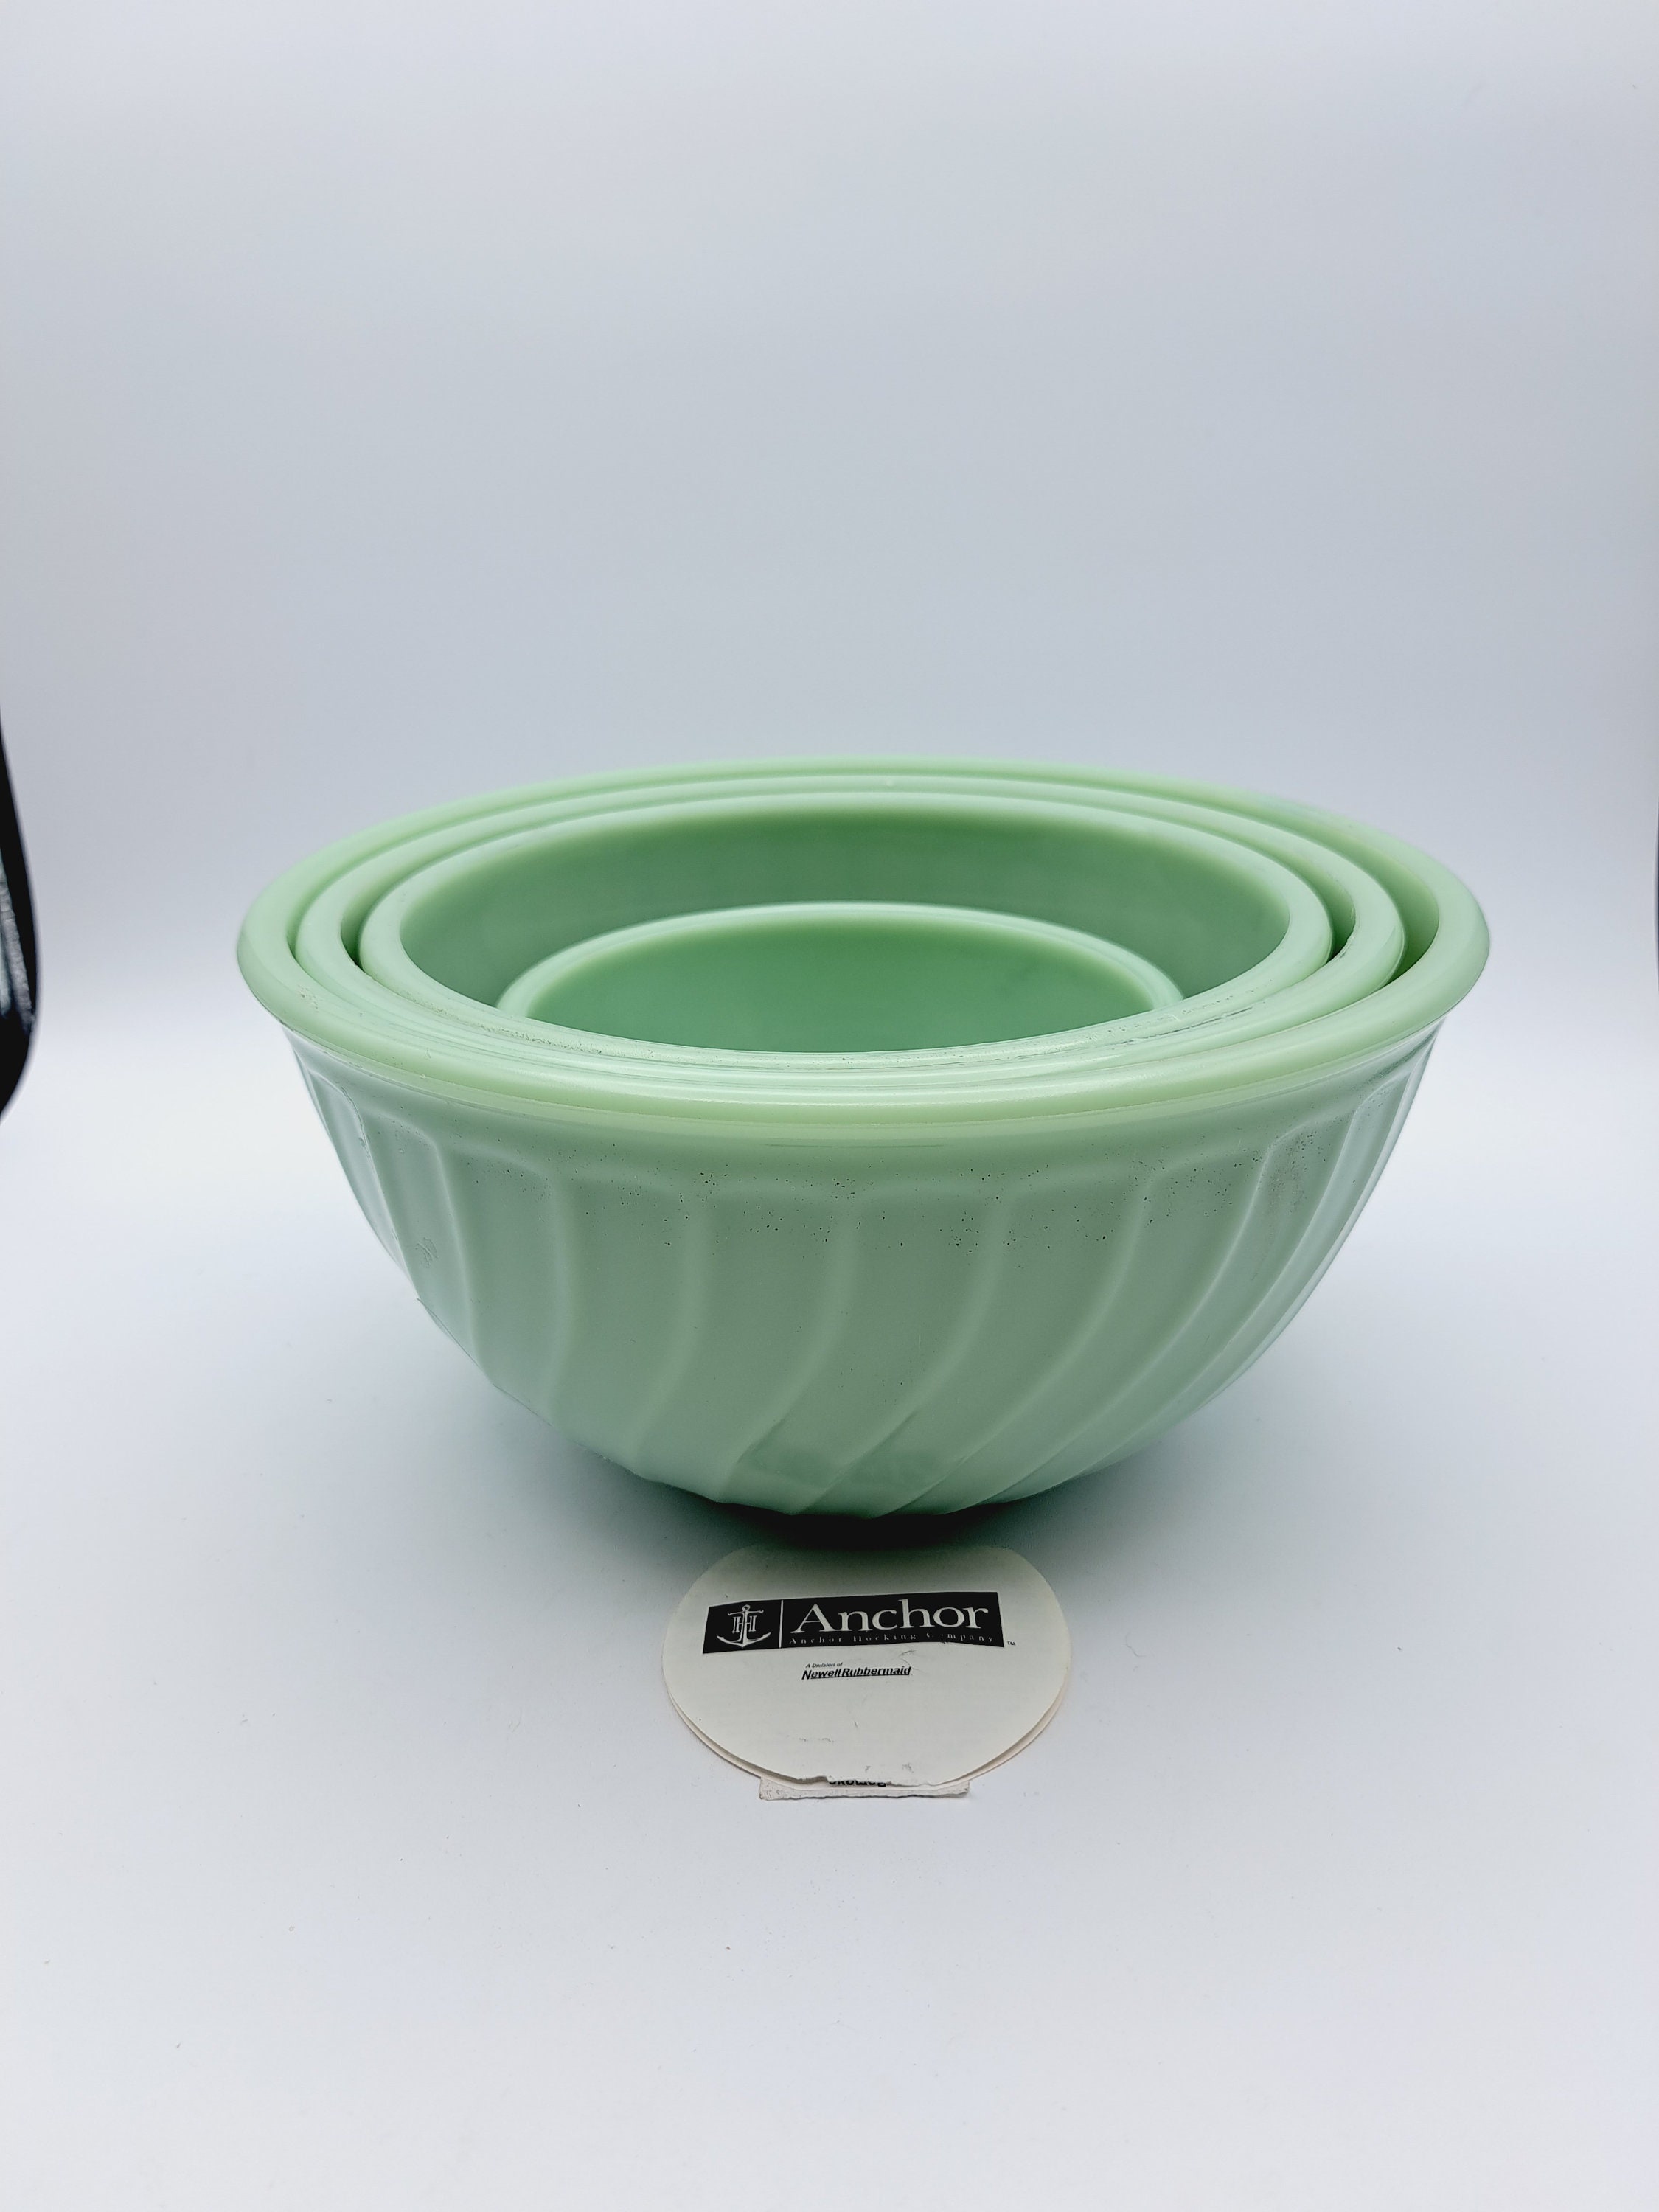 Rubbermaid Blue Mixing Bowls